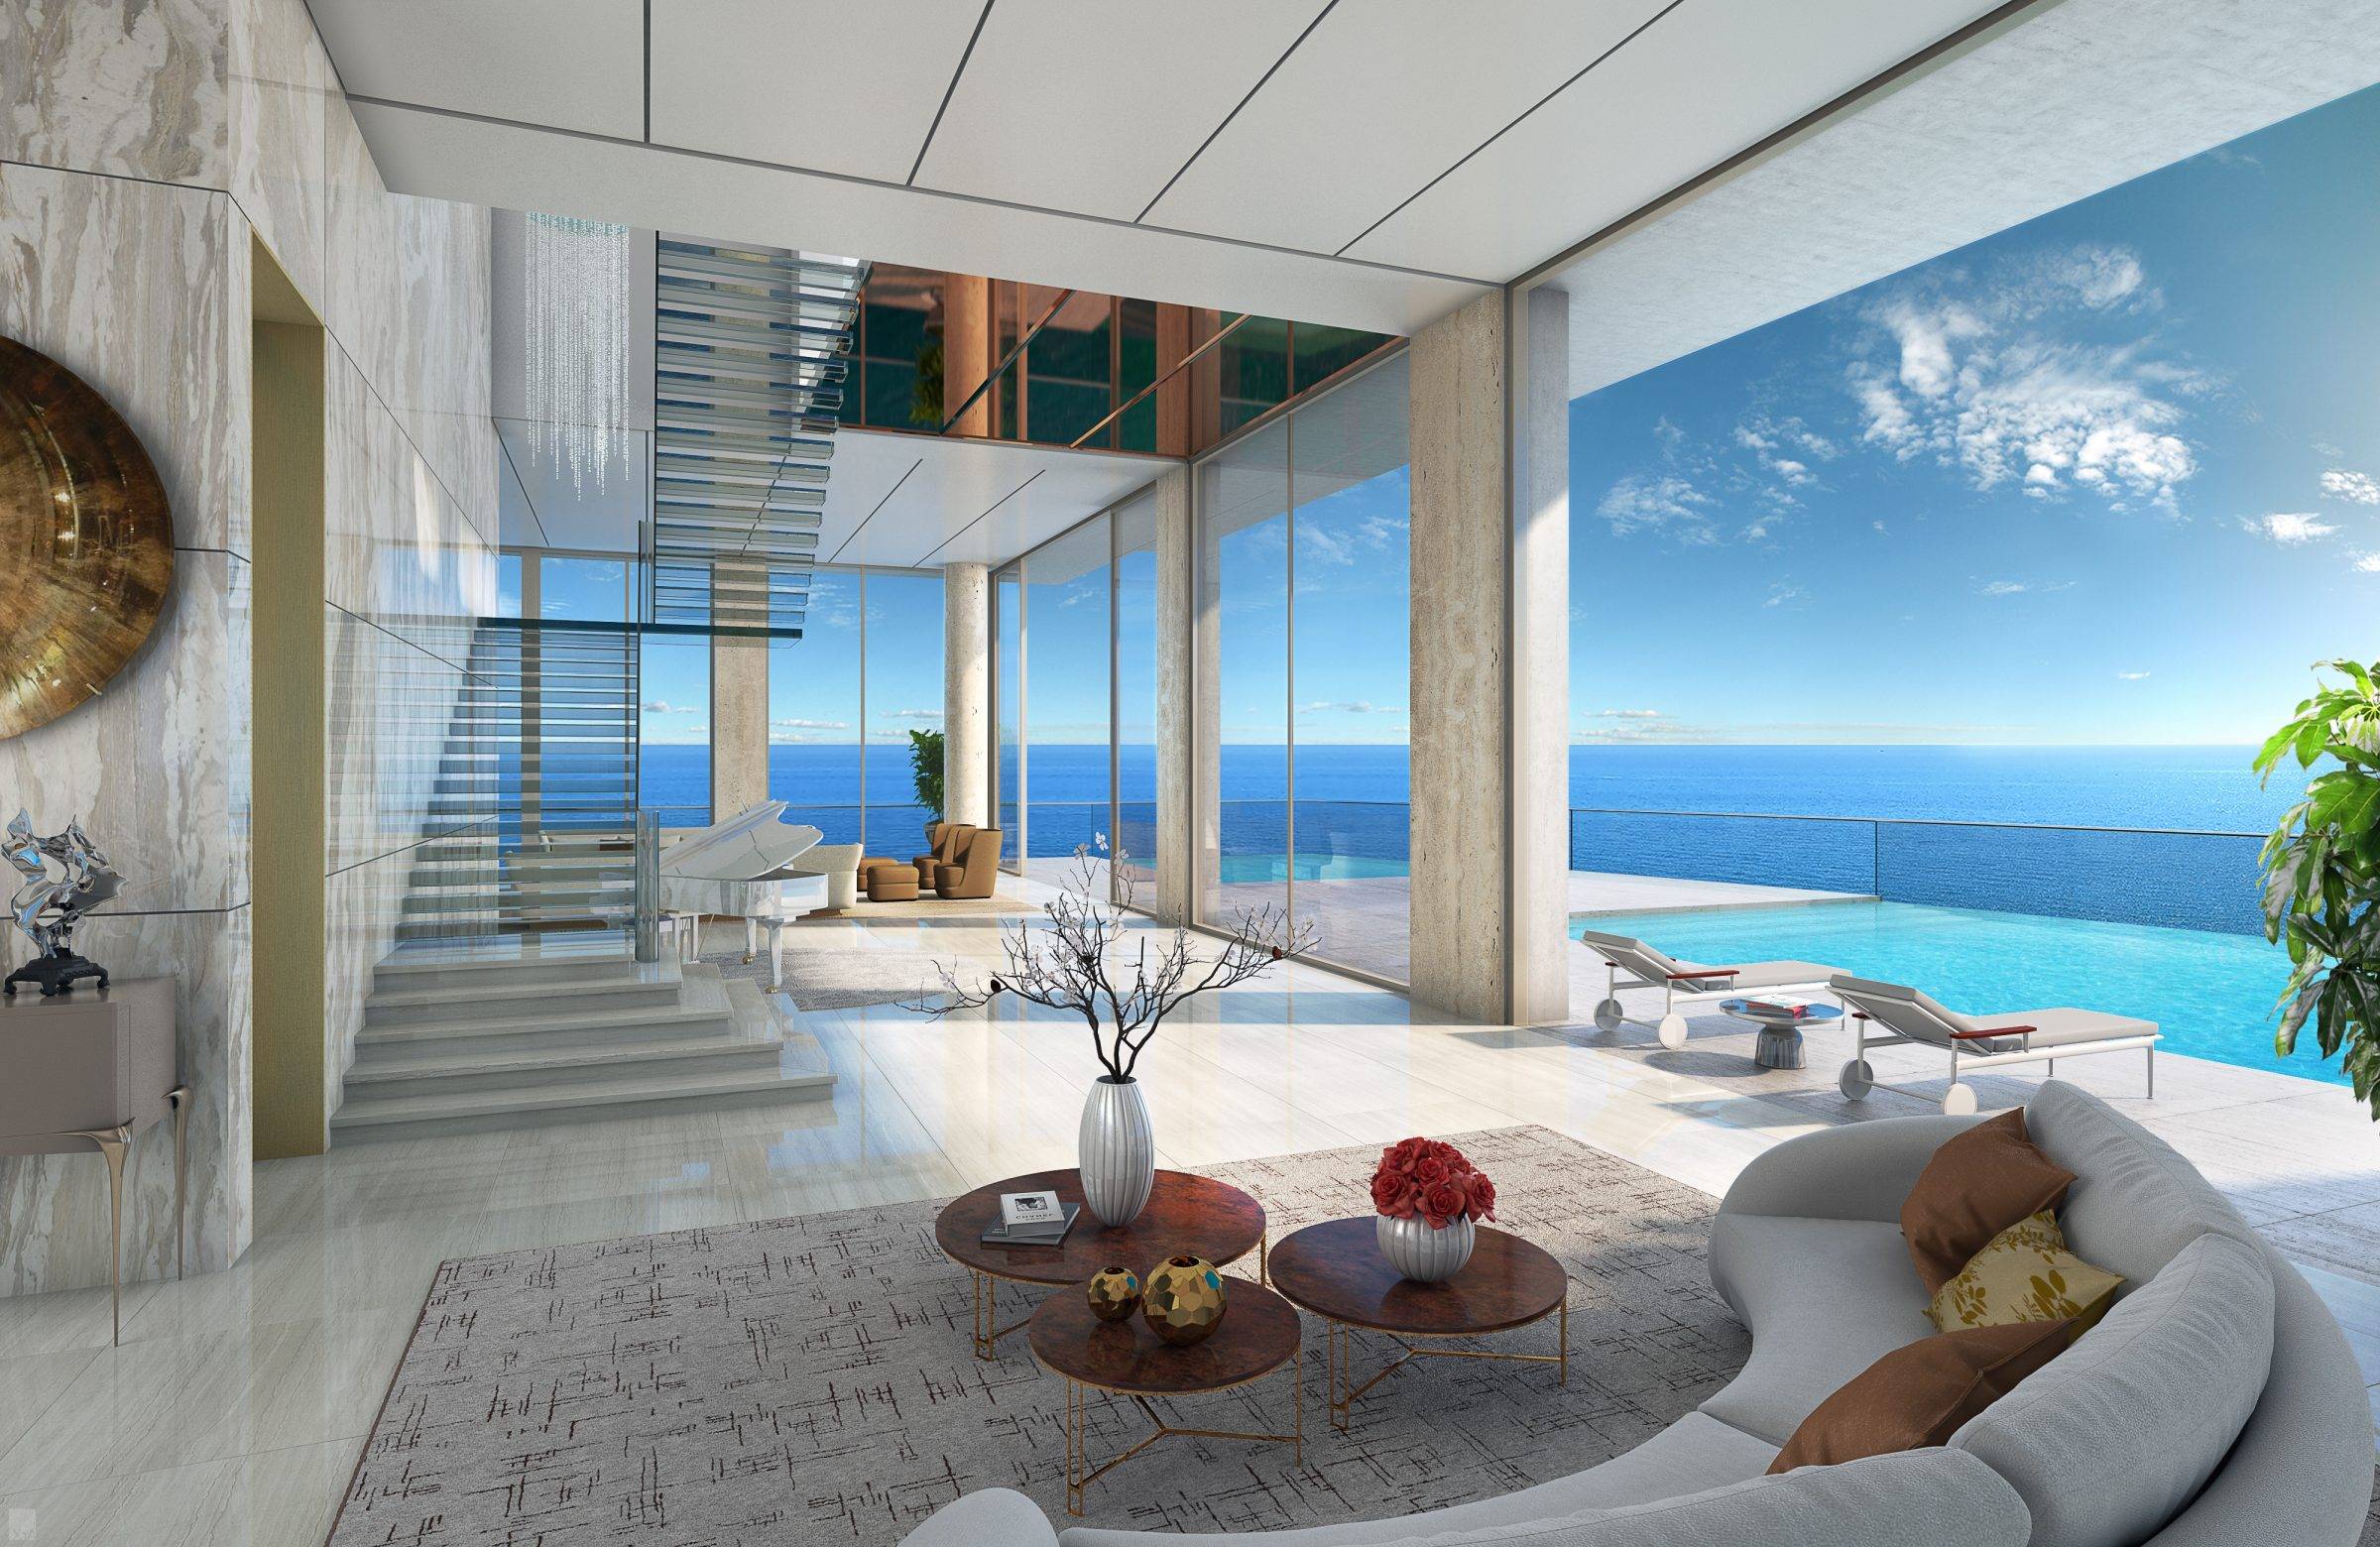 MIAMI | LUXURY BEACHFRONT TWO-STORY PENTHOUSE WITH PRIVATE TERRACE AND POOL | 6 BEDS | 8 BATHS |THE ESTATES AT ACQUALINA